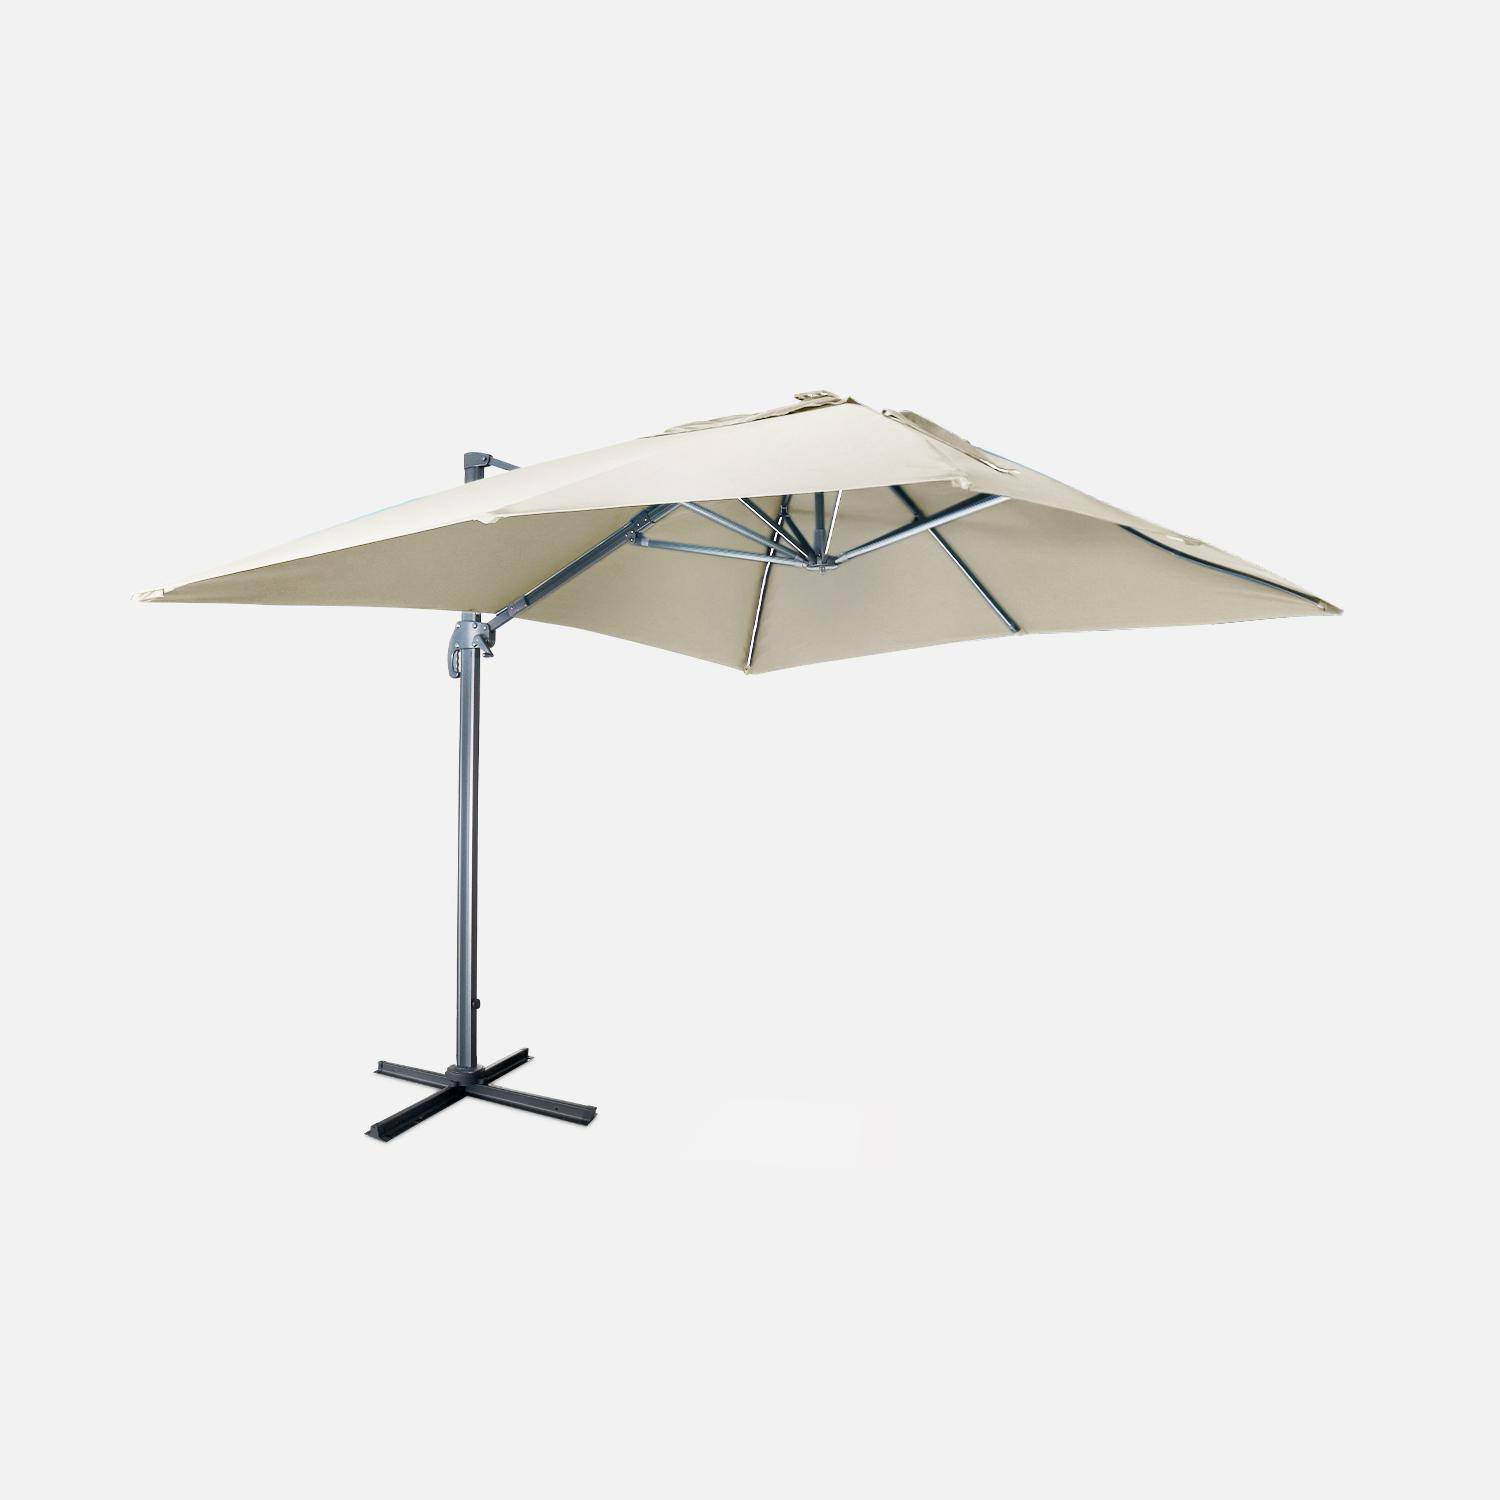 Premium quality rectangular 3x4m cantilever parasol with solar-powered integrated LED lights - Cantilever parasol, tiltable, foldable with 360° rotation, solar charging, cover included - Luce - Beige,sweeek,Photo1